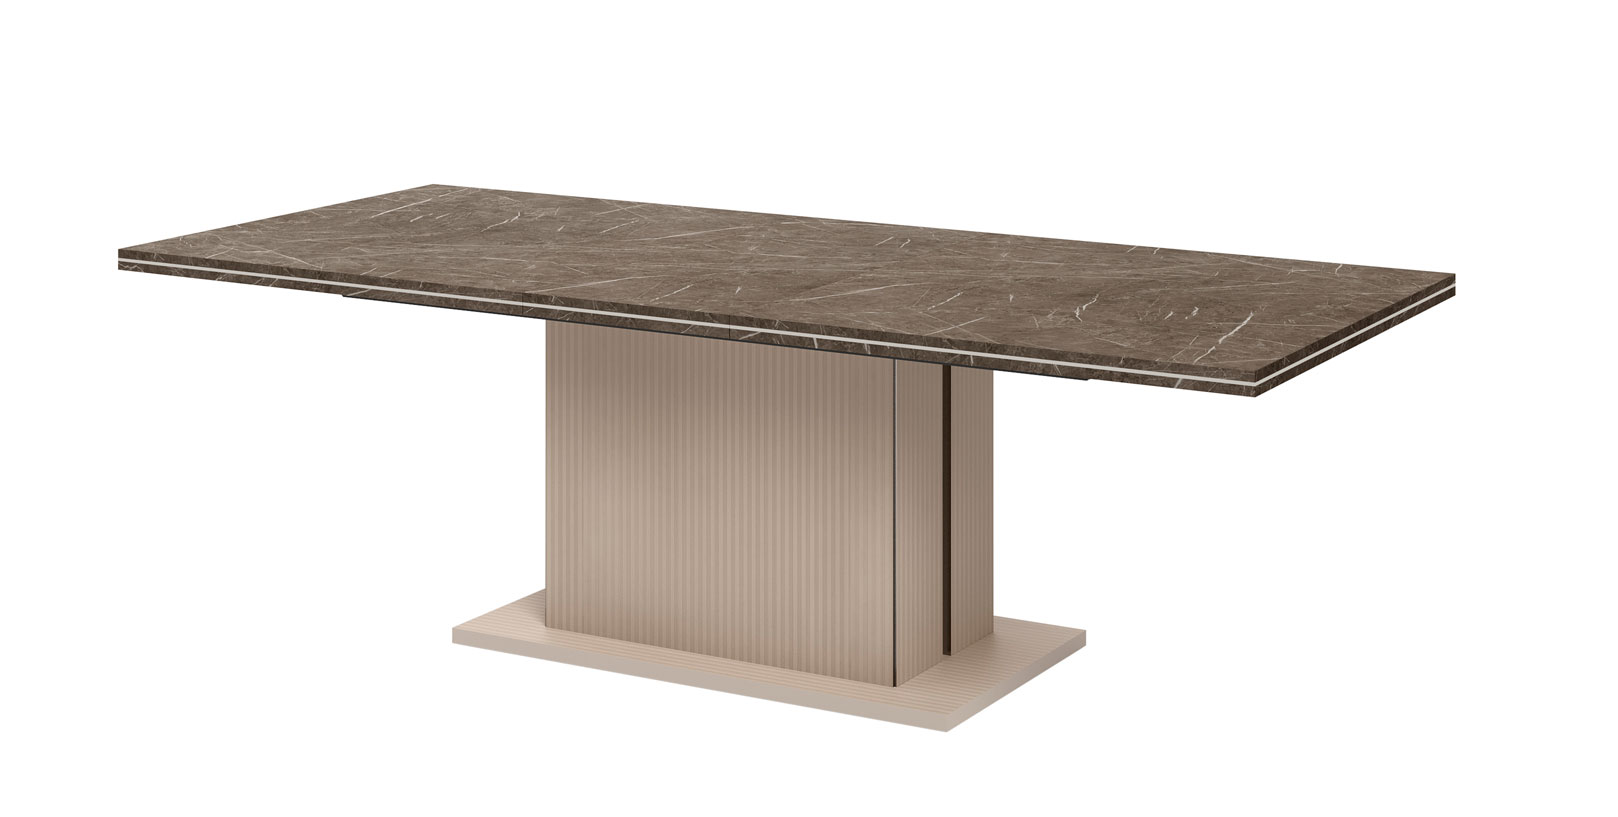 Brands Camel Classic Collection, Italy Fidia- Aris Dining table